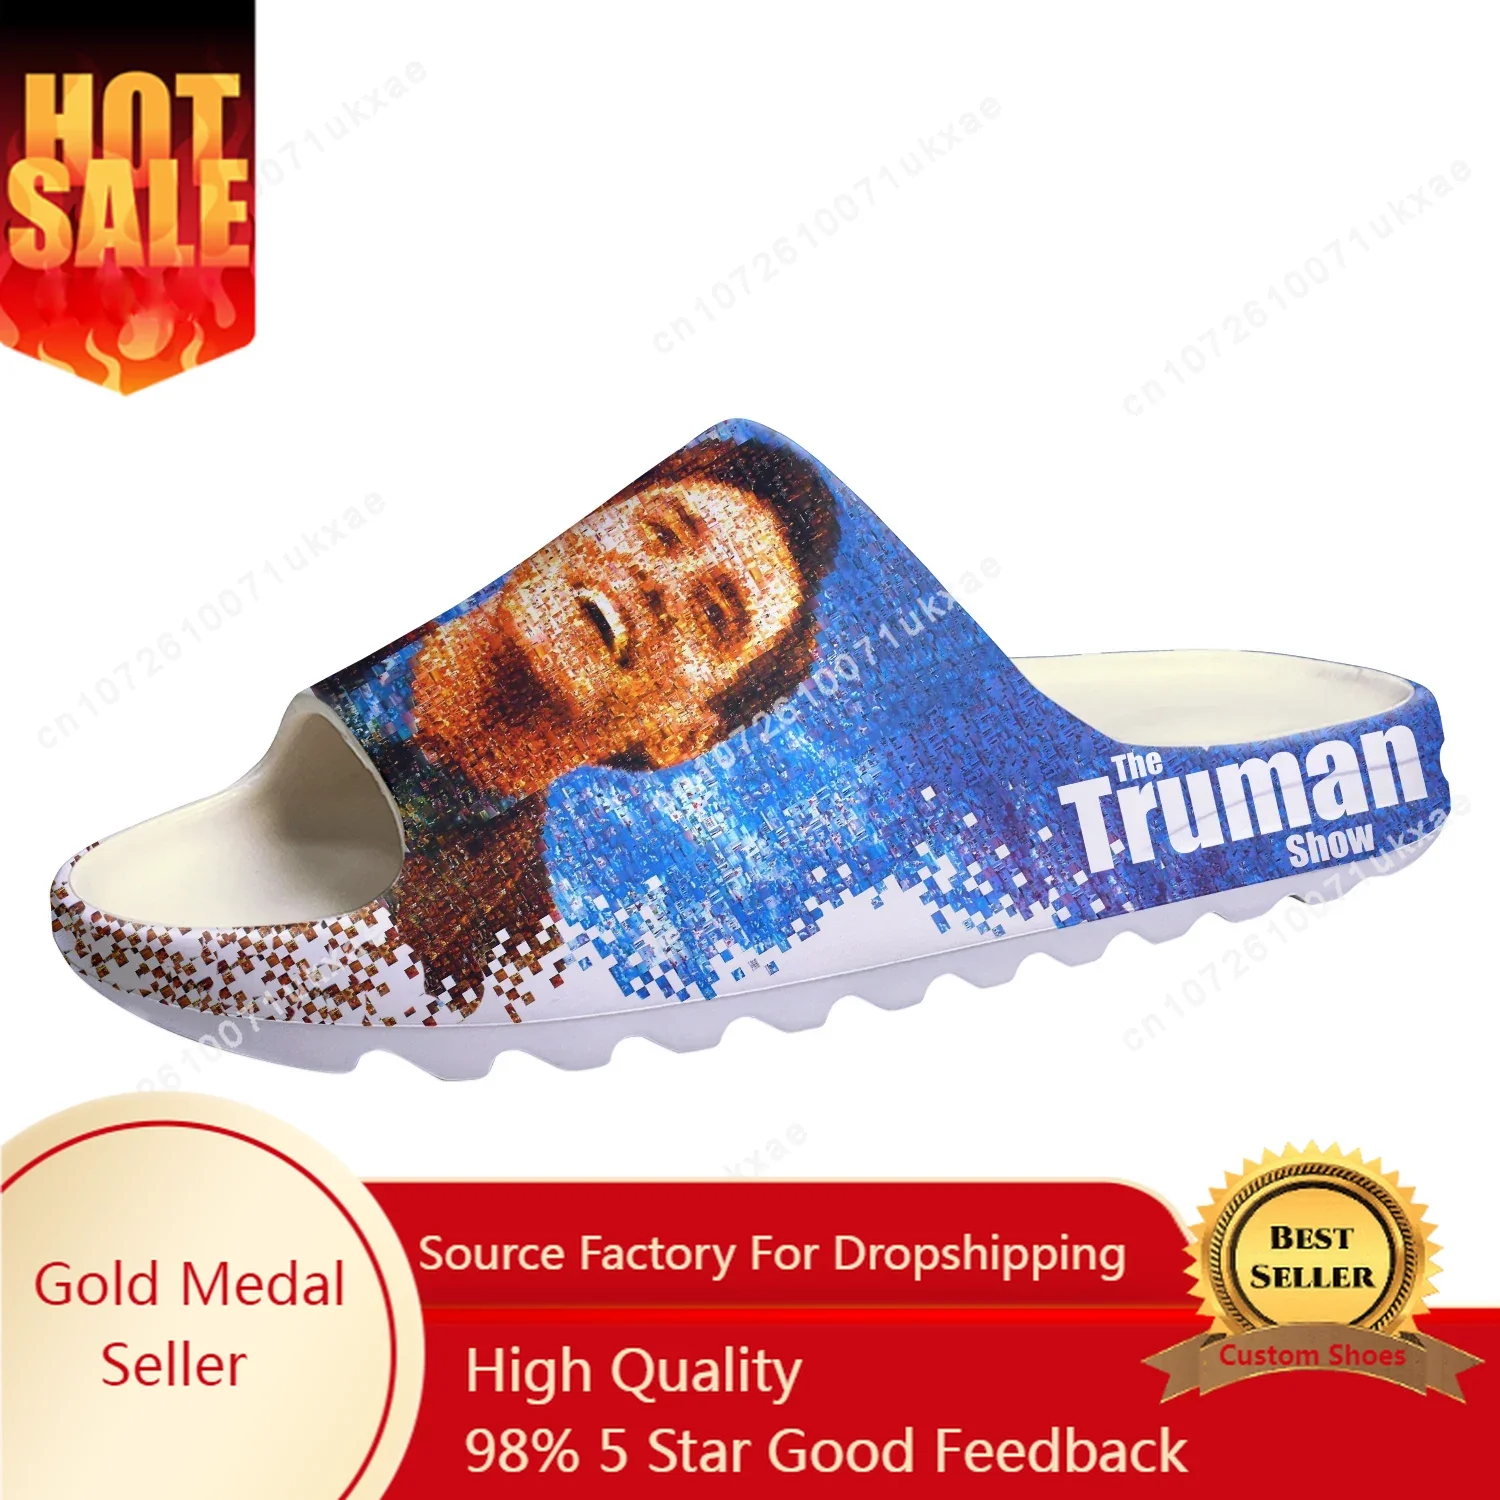 

truman show Soft Sole Sllipers Home Clogs Jim Carrey Step On Water Shoes Mens Womens Teenager Step in Customized Sandals